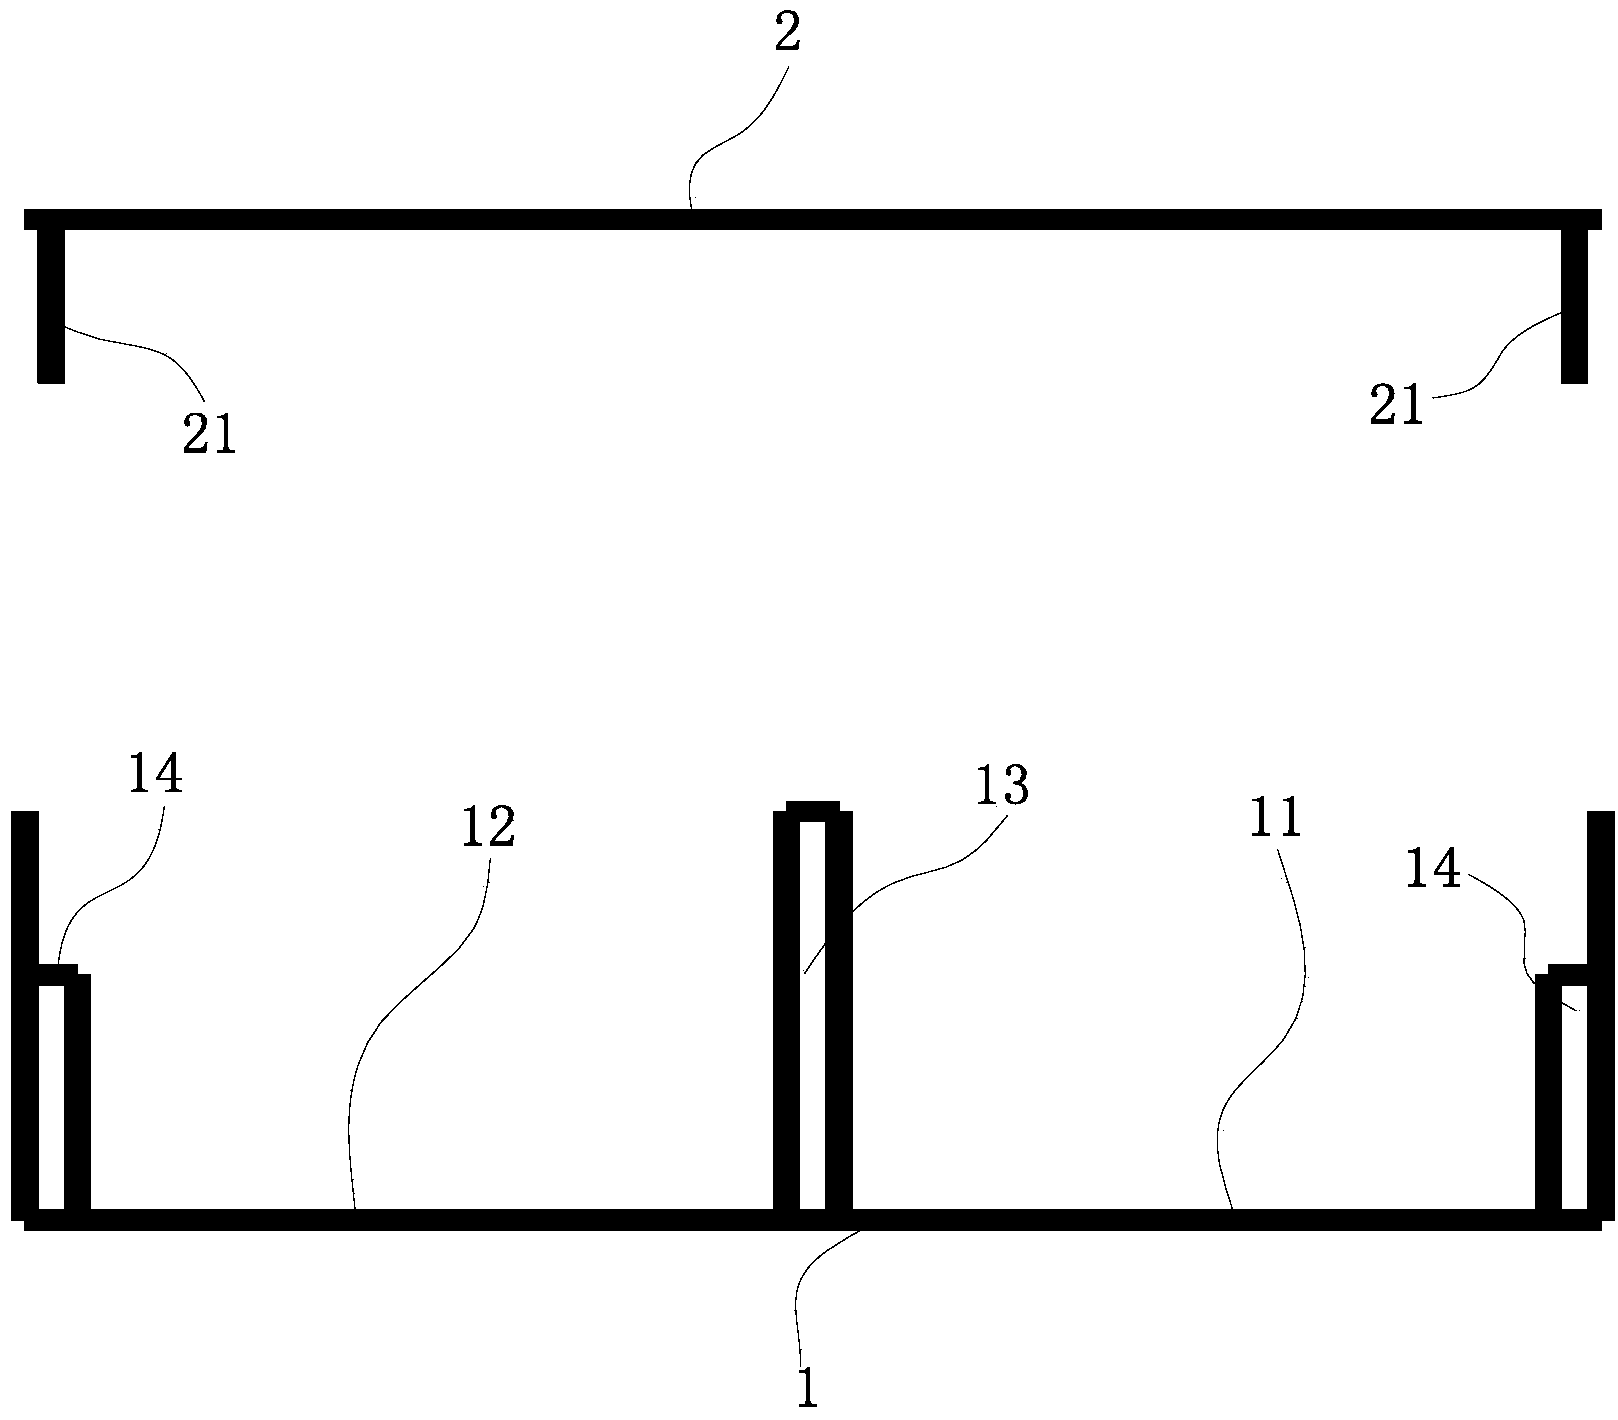 Slot and layout structure of slots